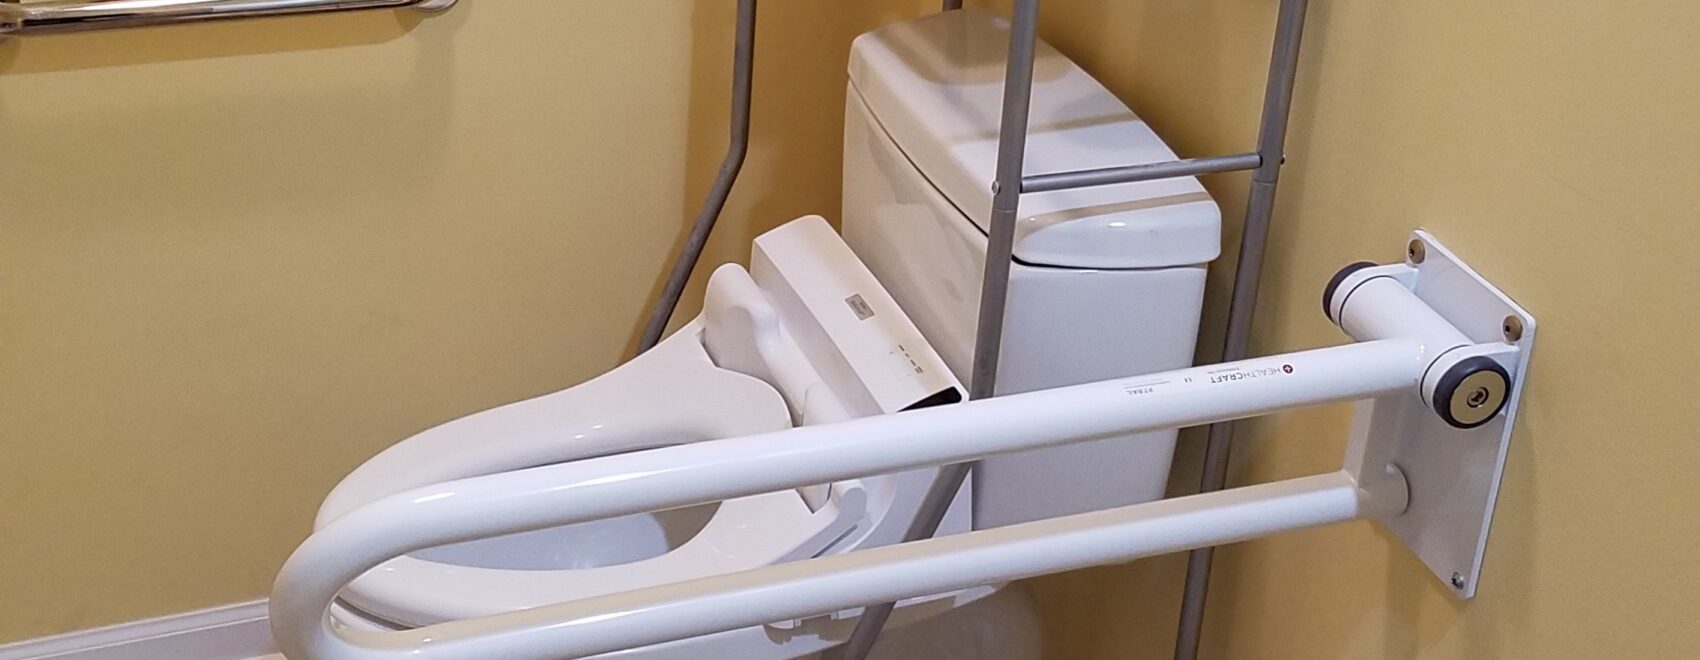 Photo: Accessible toilet with bidet and grab bars